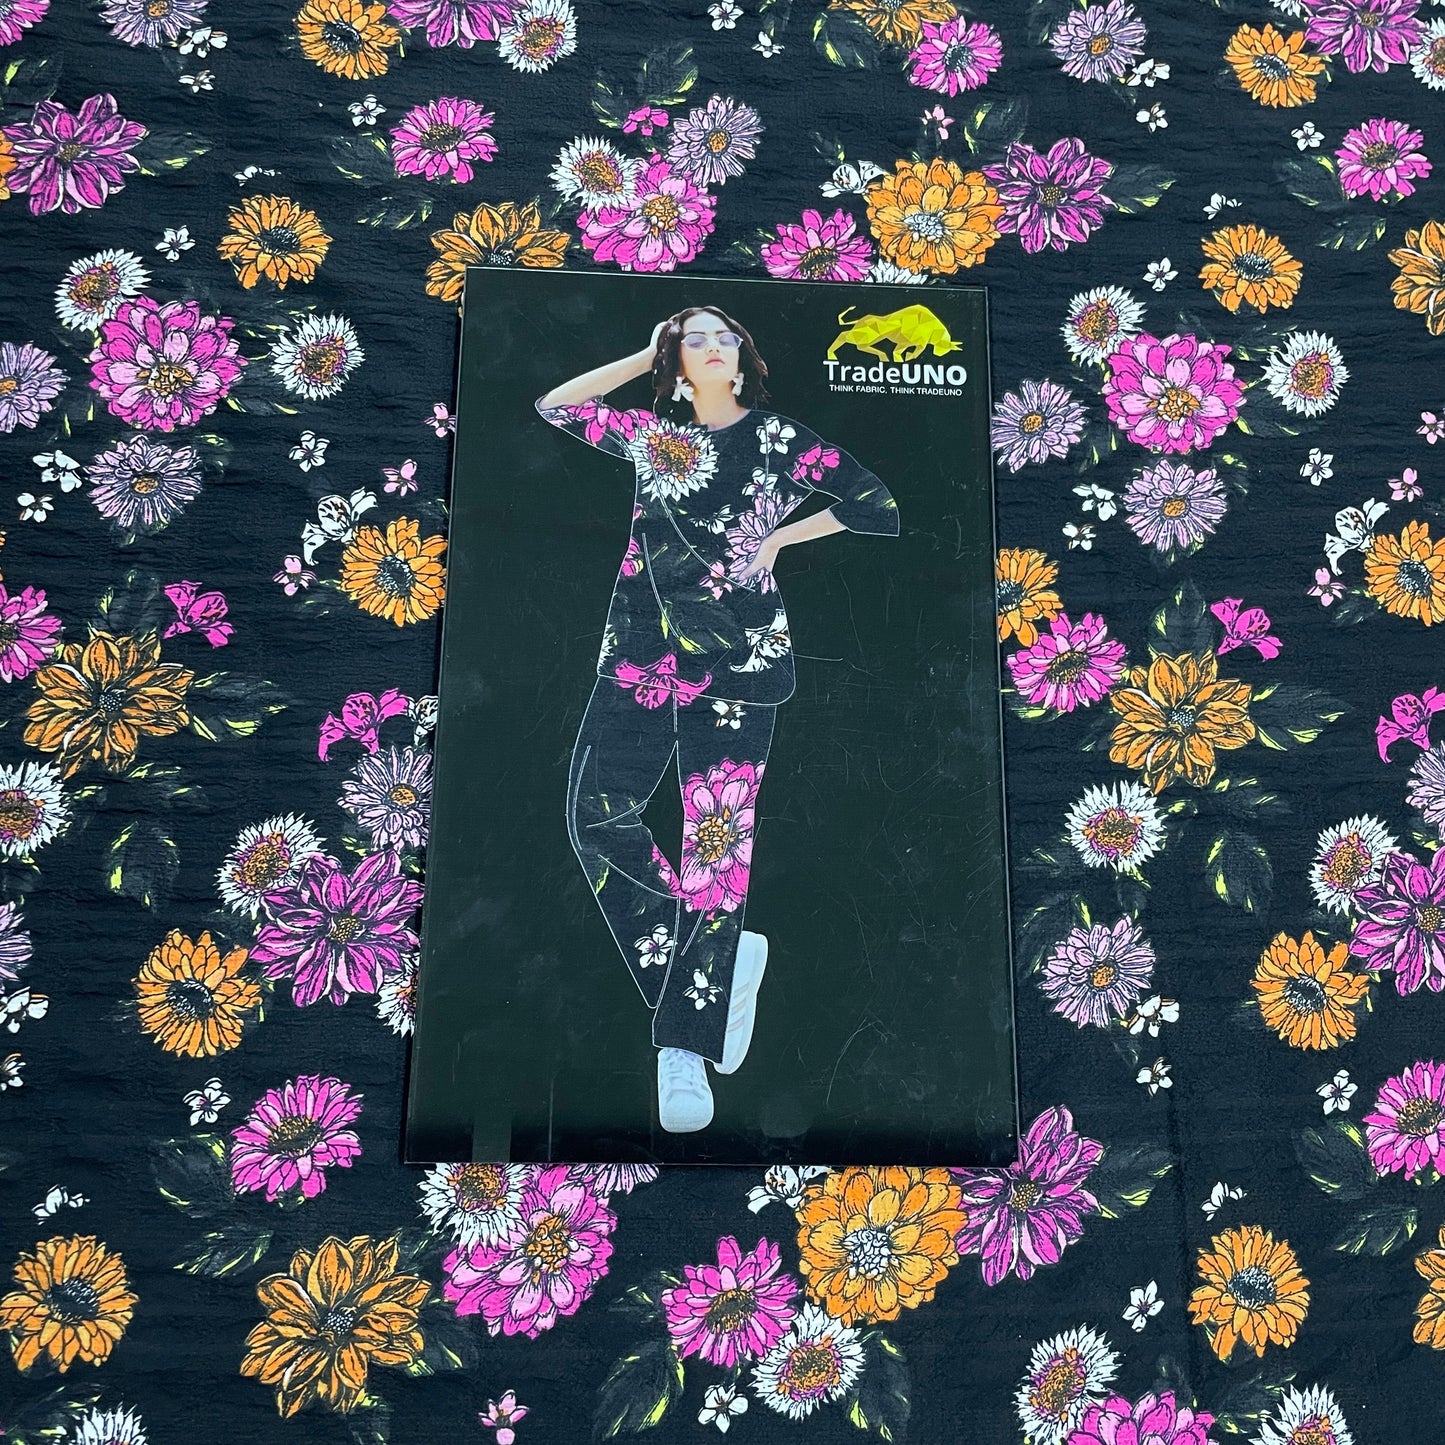 Black With Multicolor Floral Print Moss Crepe Fabric - TradeUNO